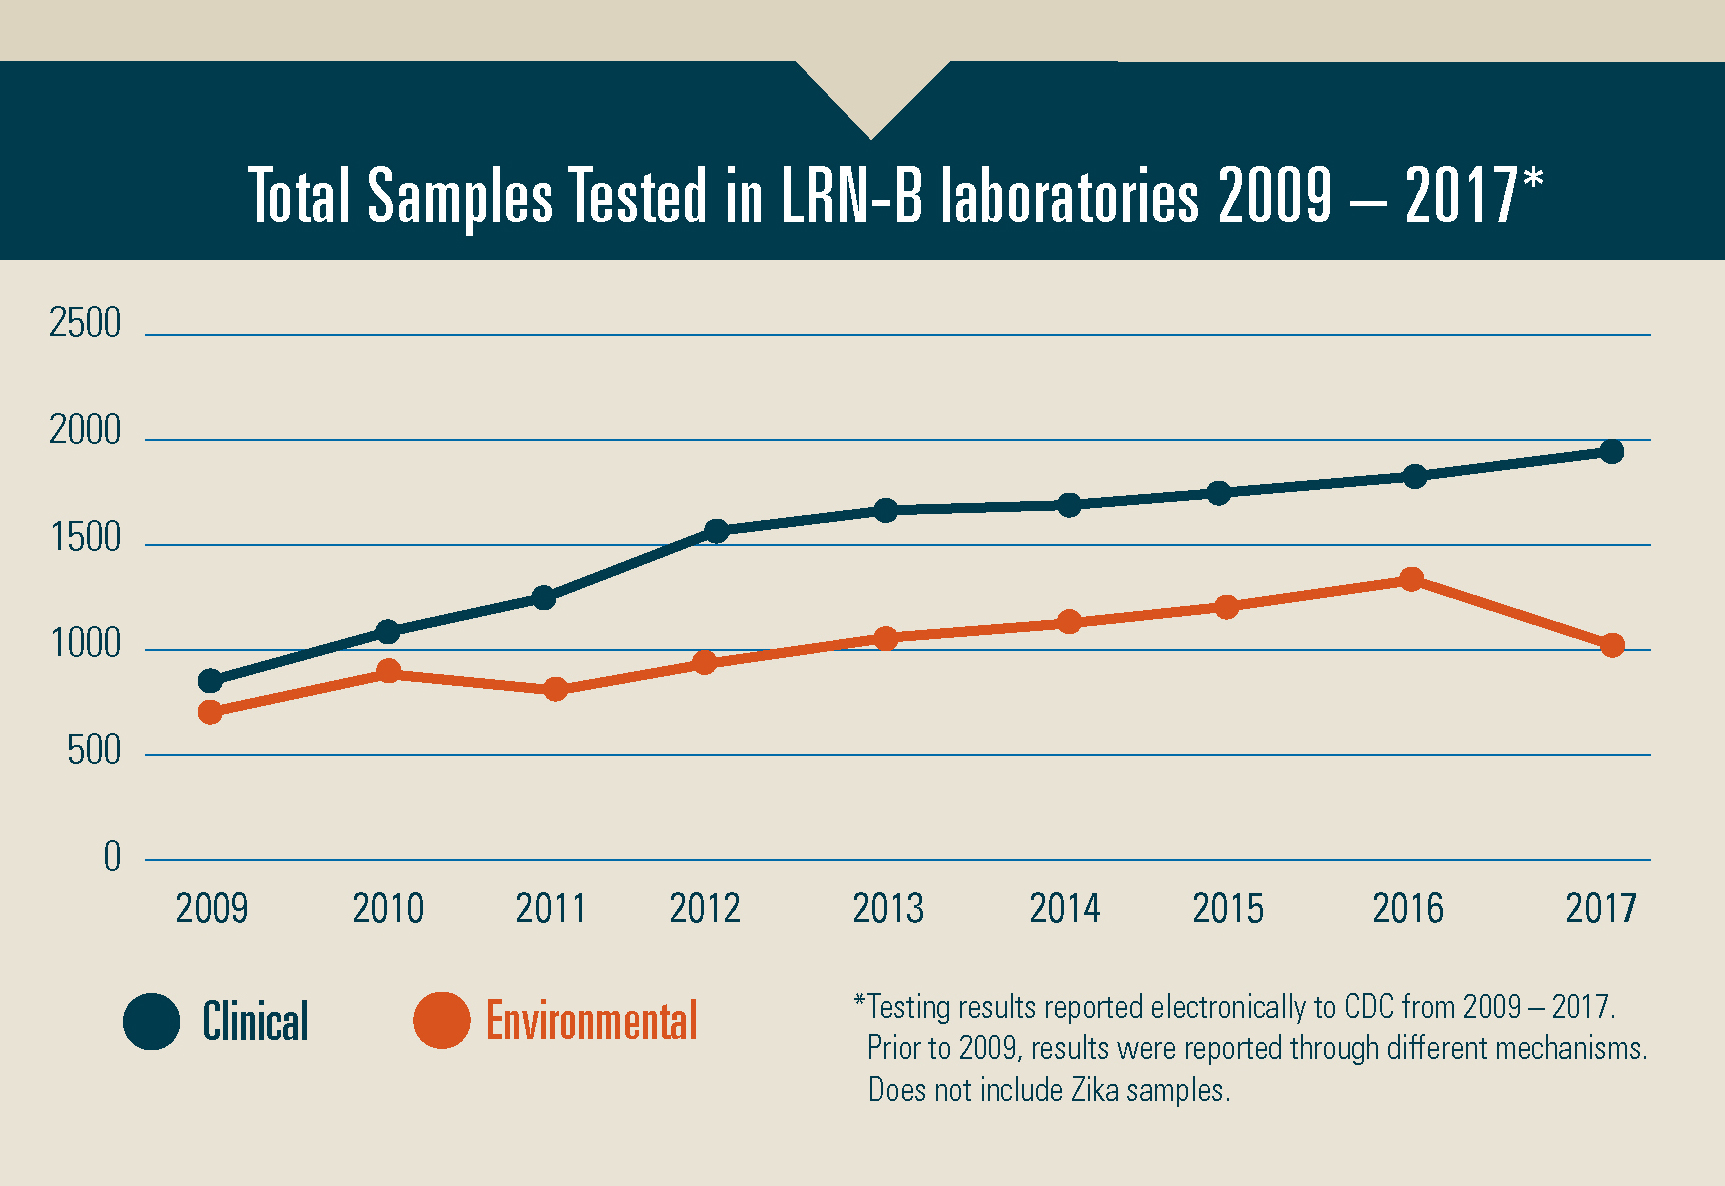 : Graph illustrating the number of clinical and environmental samples tested in LRN-B laboratories from 2009 to 2017, not including Zika samples. 